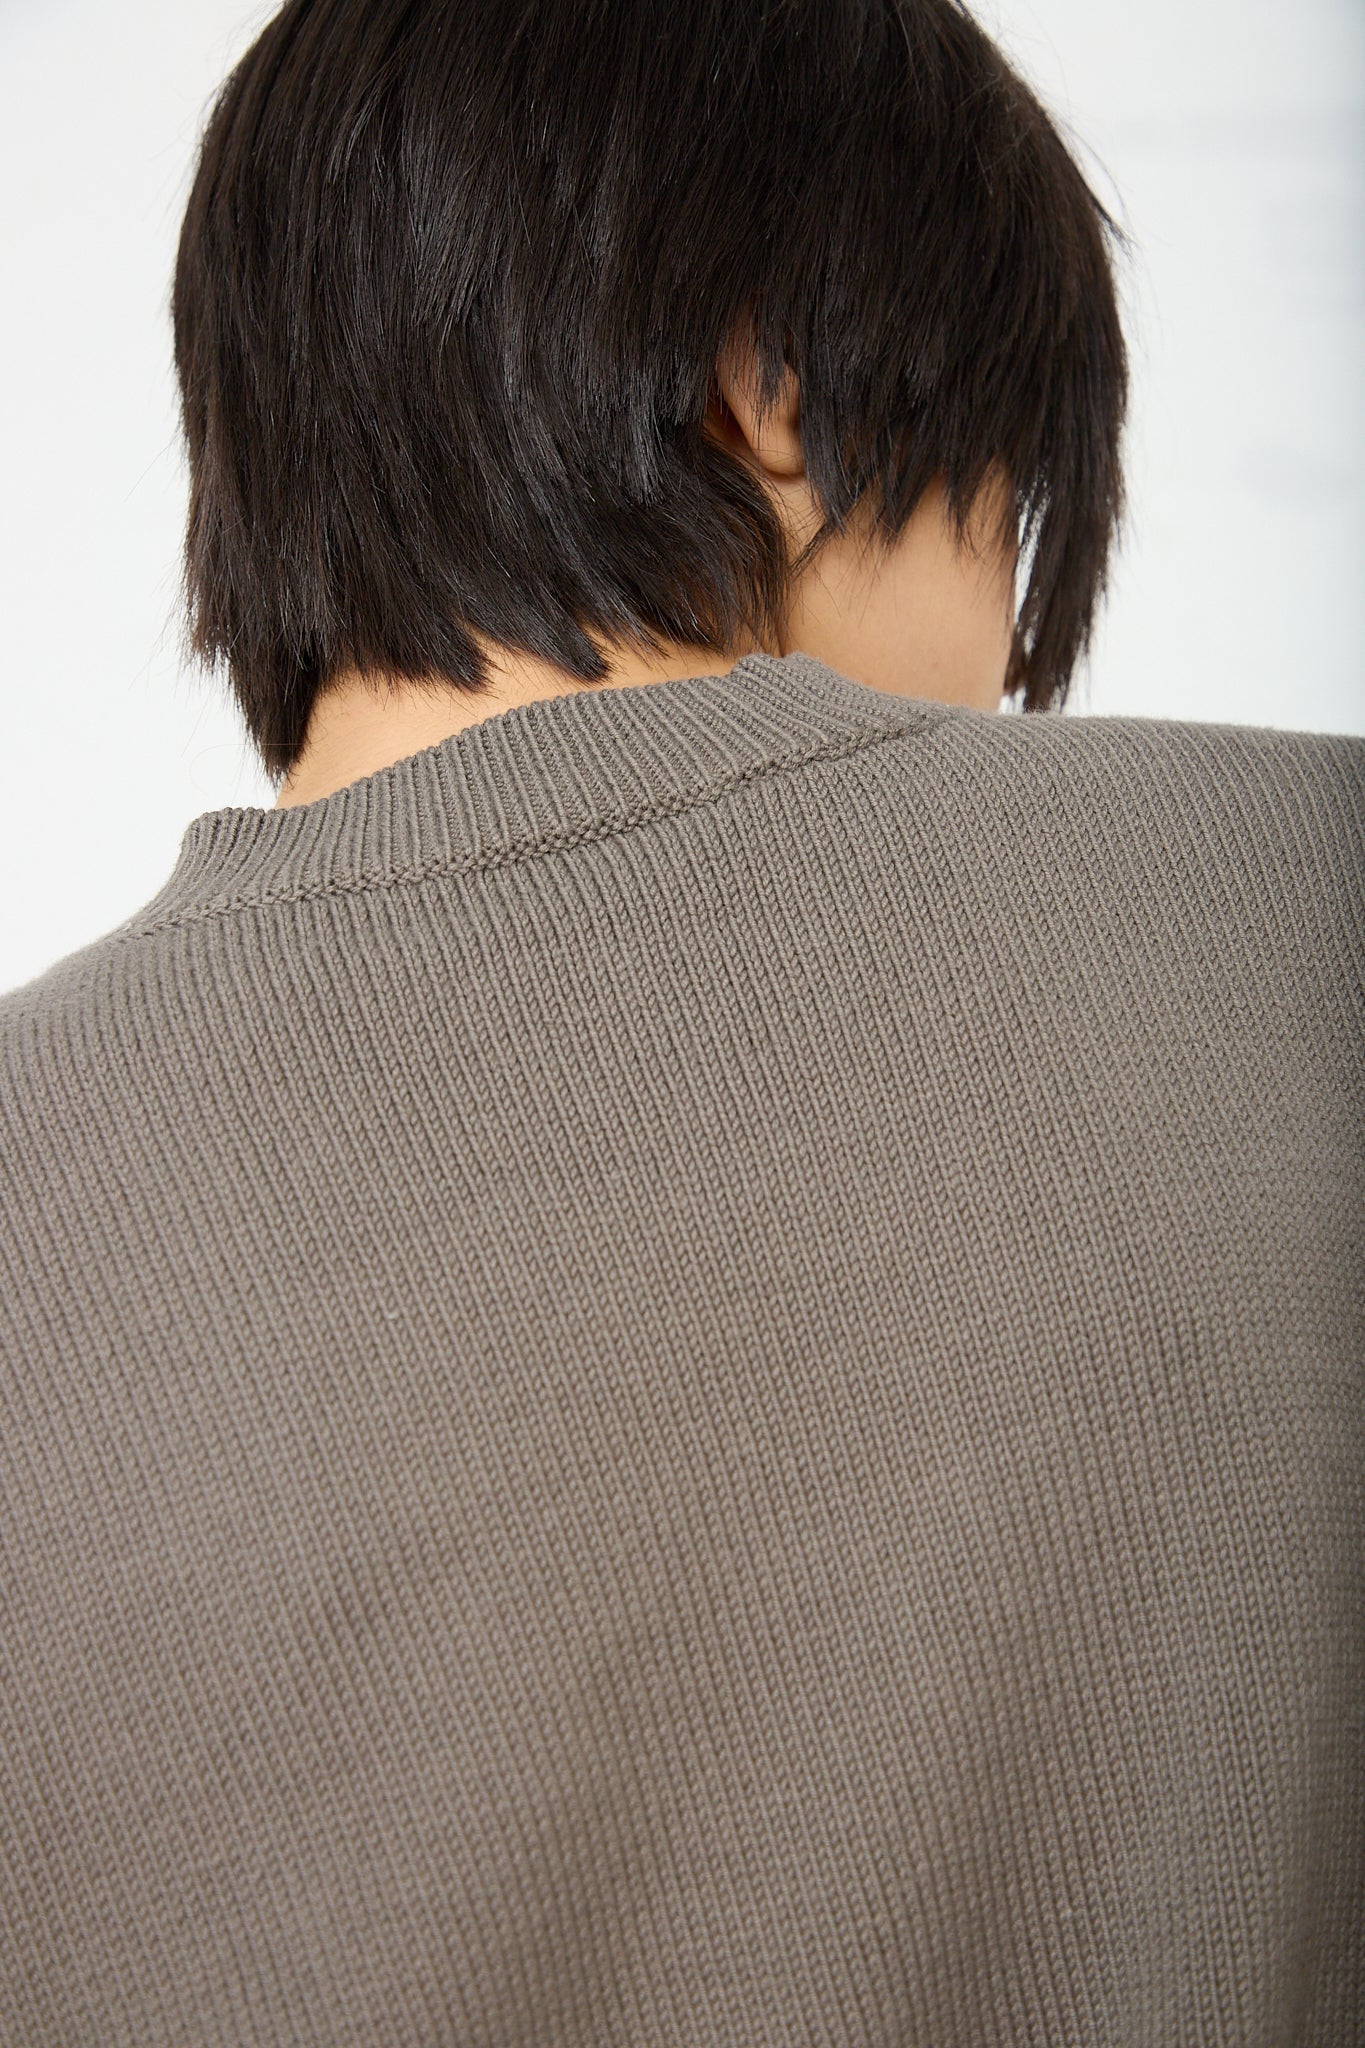 The back view of a woman wearing an olive brown colored pima cotton sweater by Lauren Manoogian. Up close.